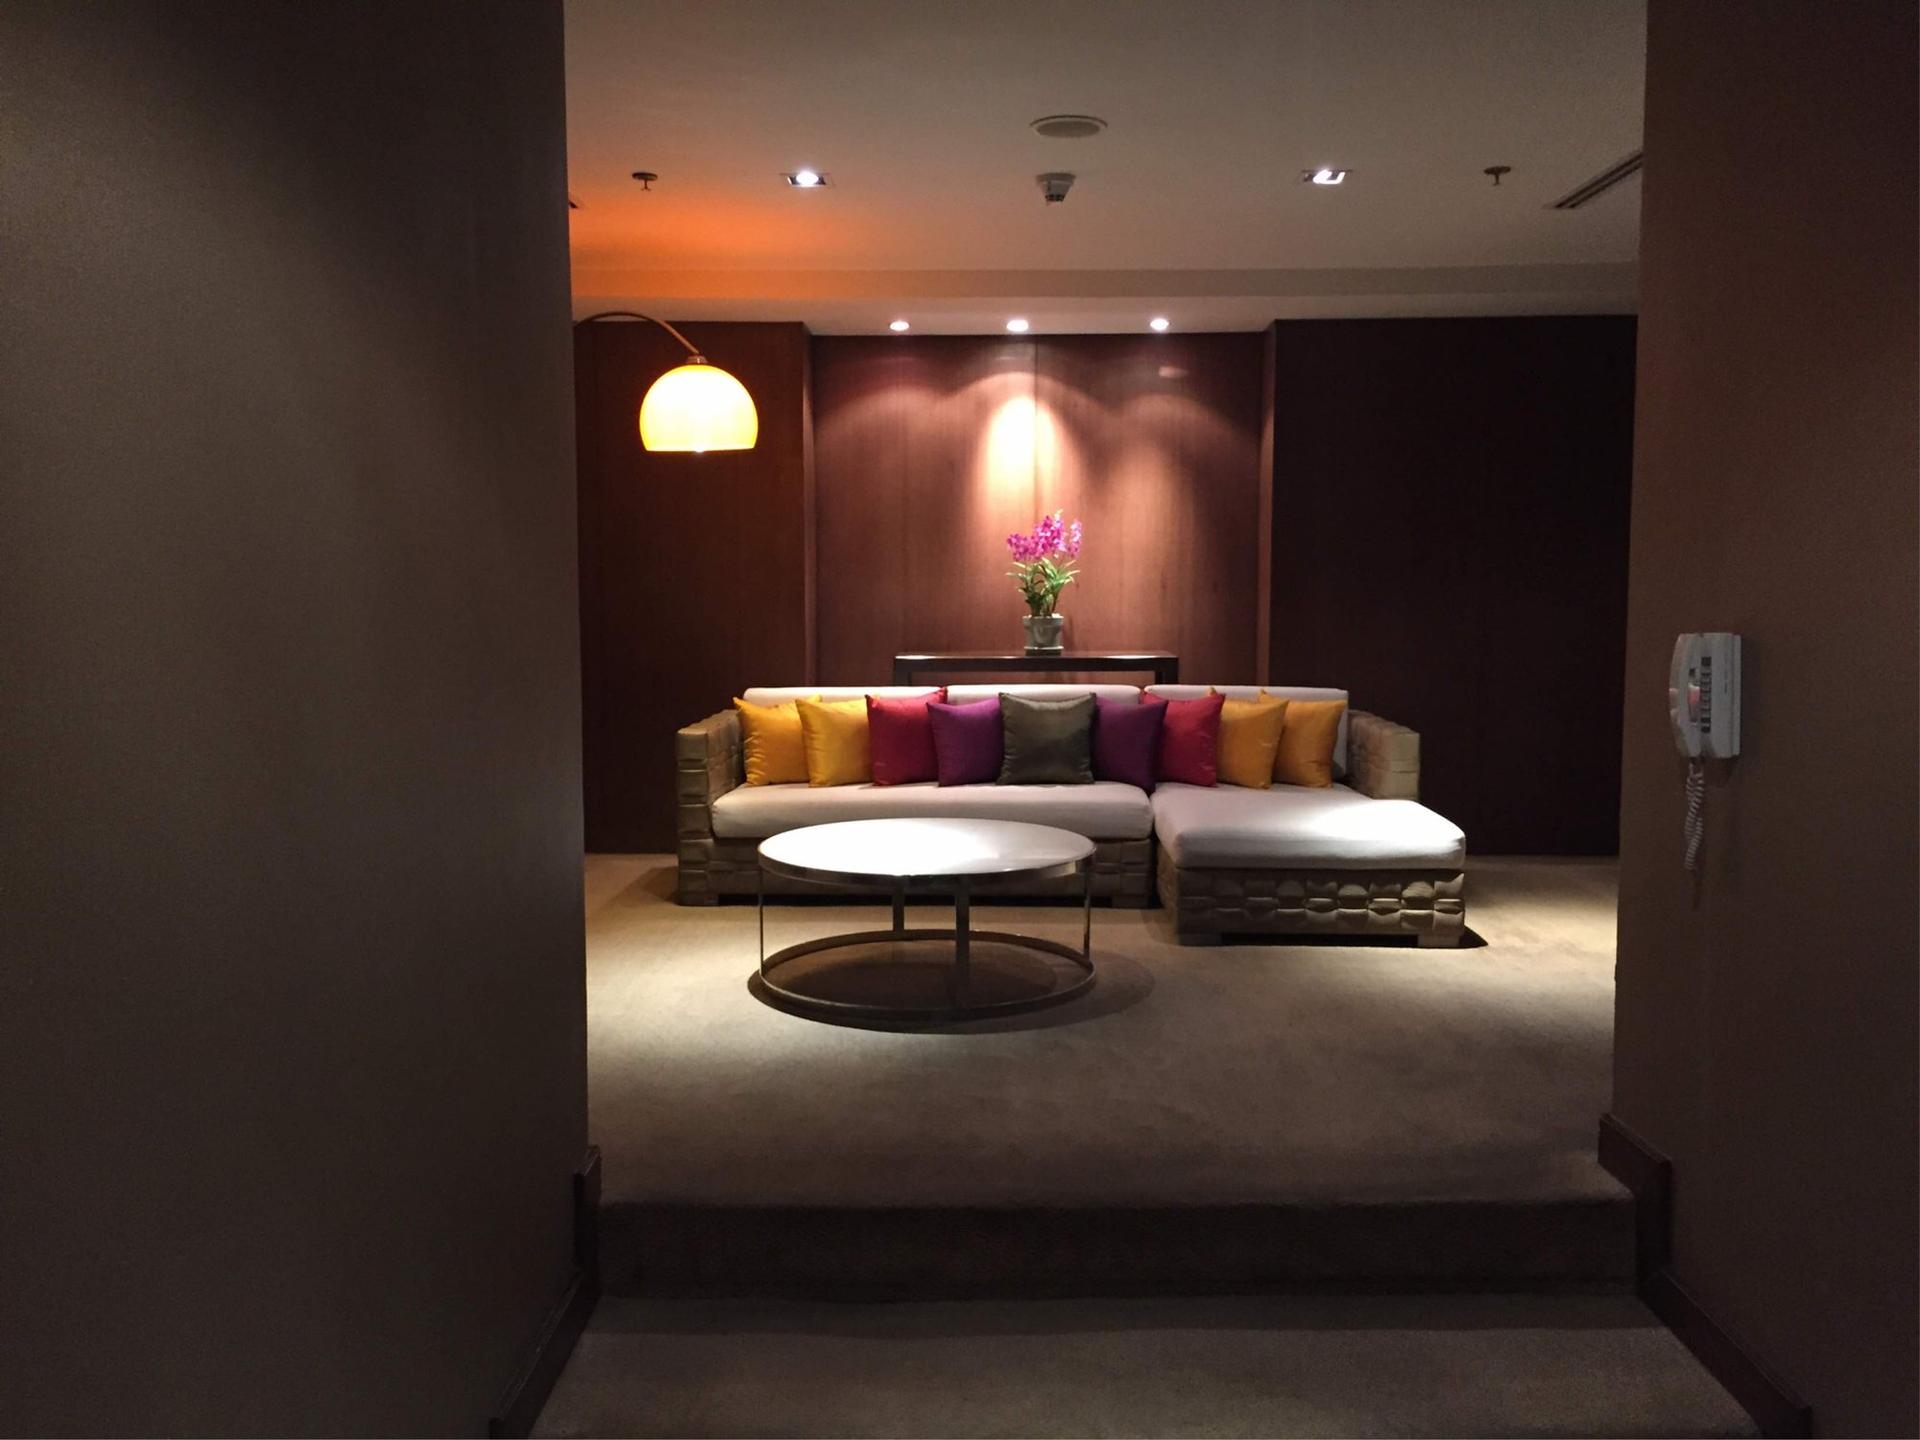 Thai Airways Royal First Class Lounge image 28 of 44